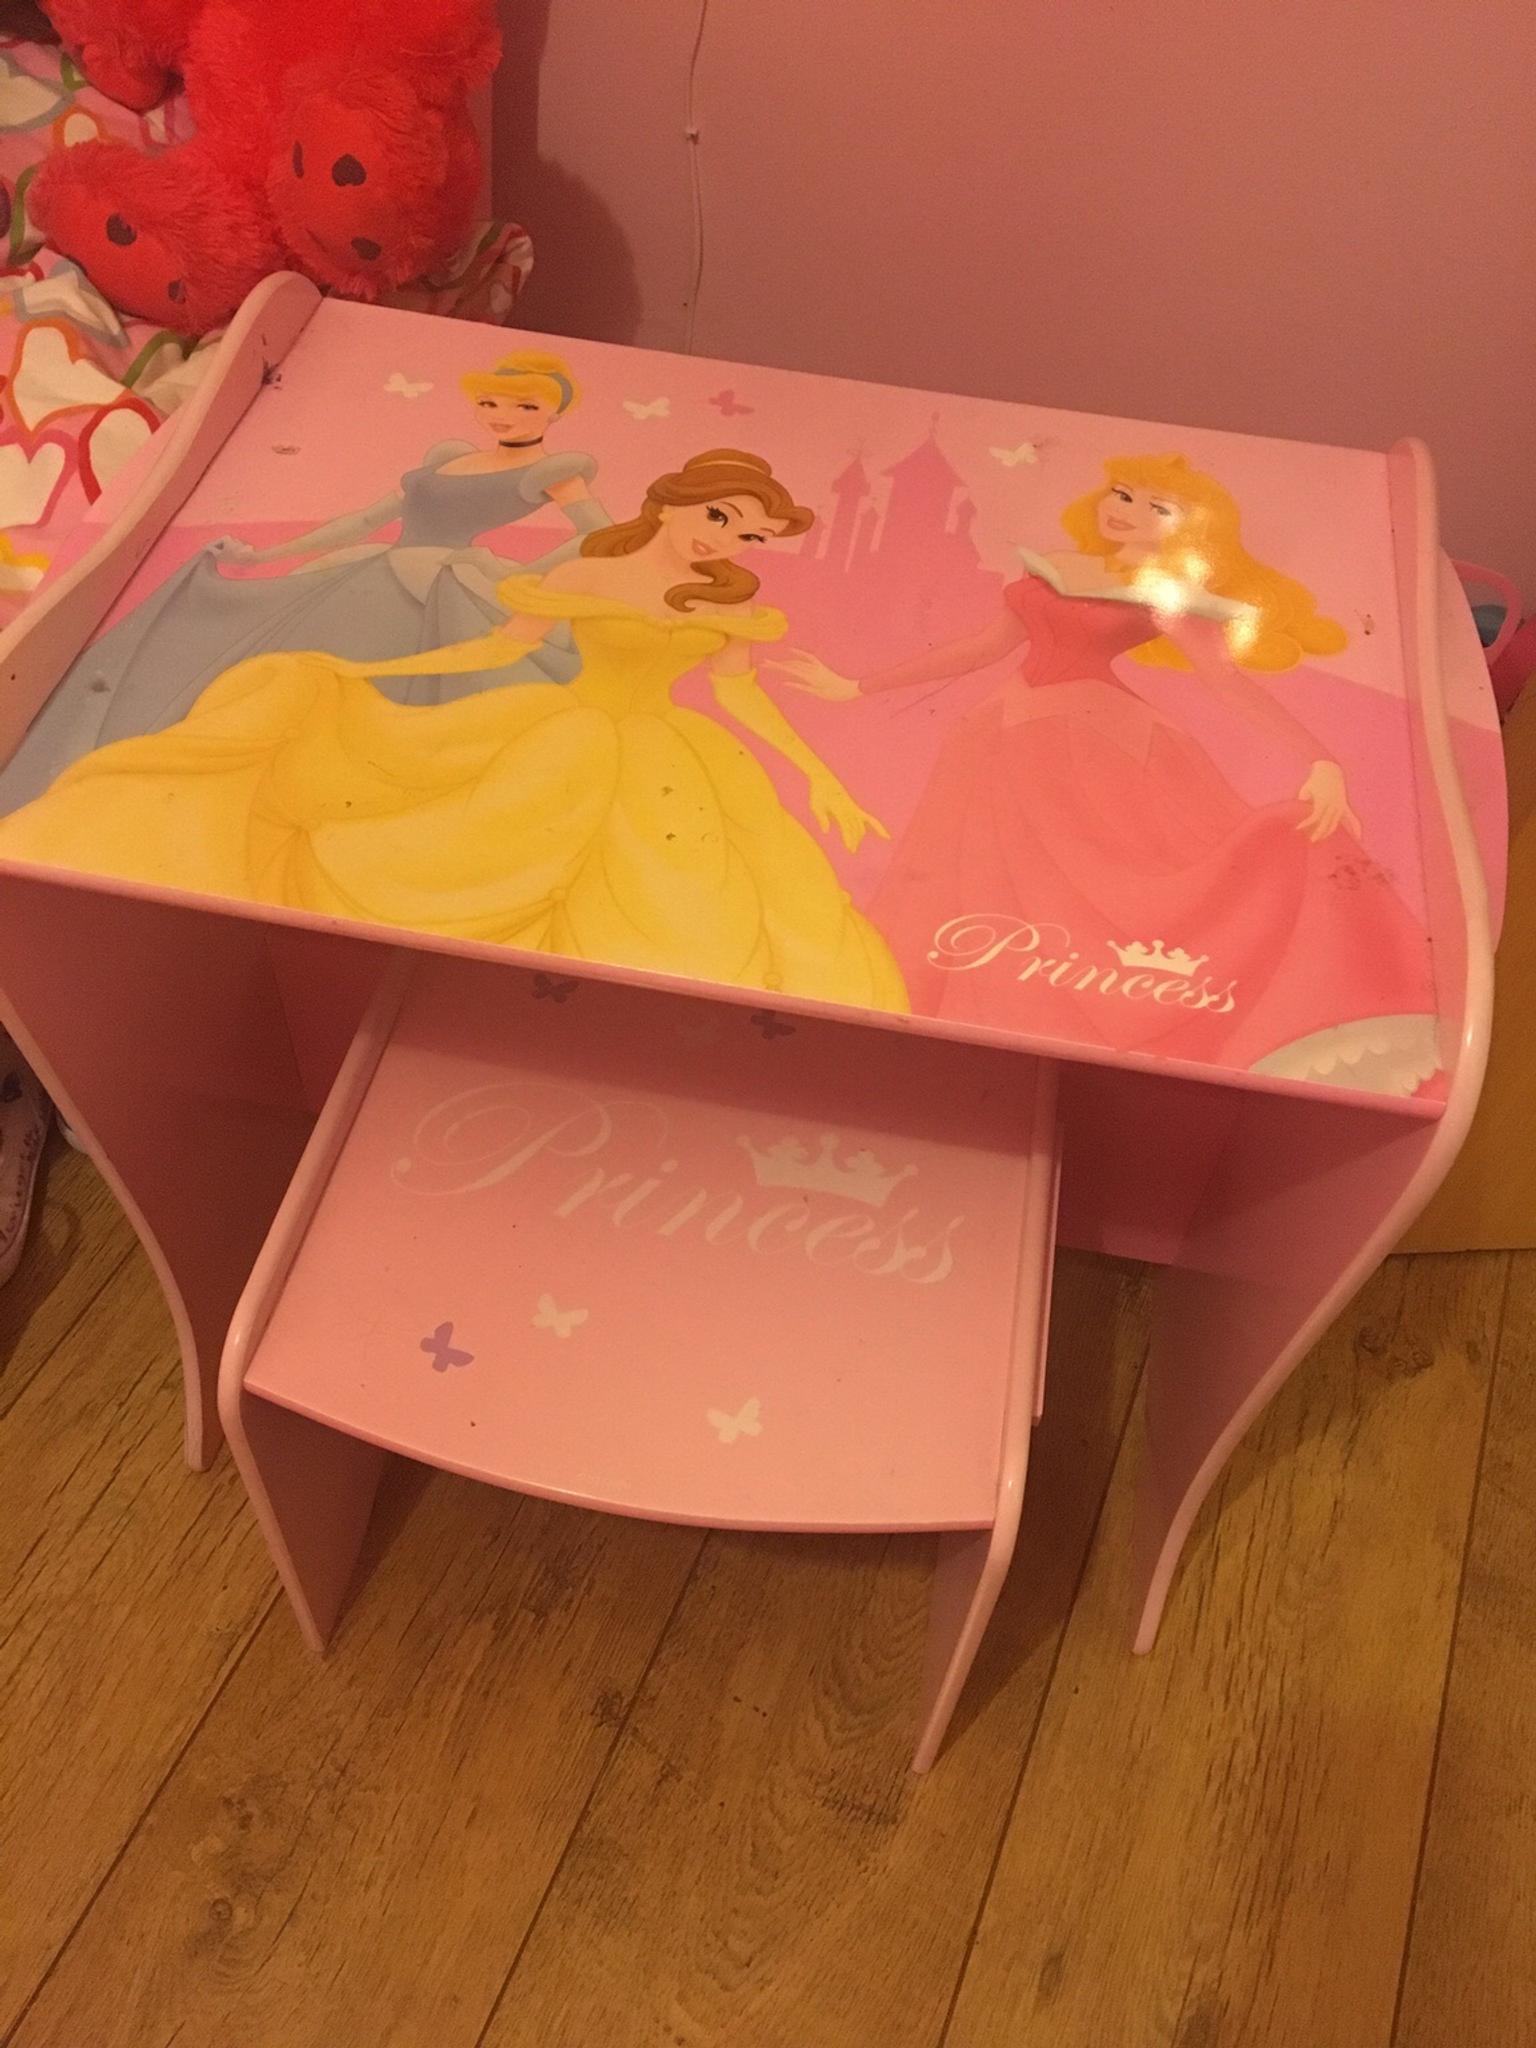 Disney Princess Desk Chair Set In Nw9 Barnet For 10 00 For Sale